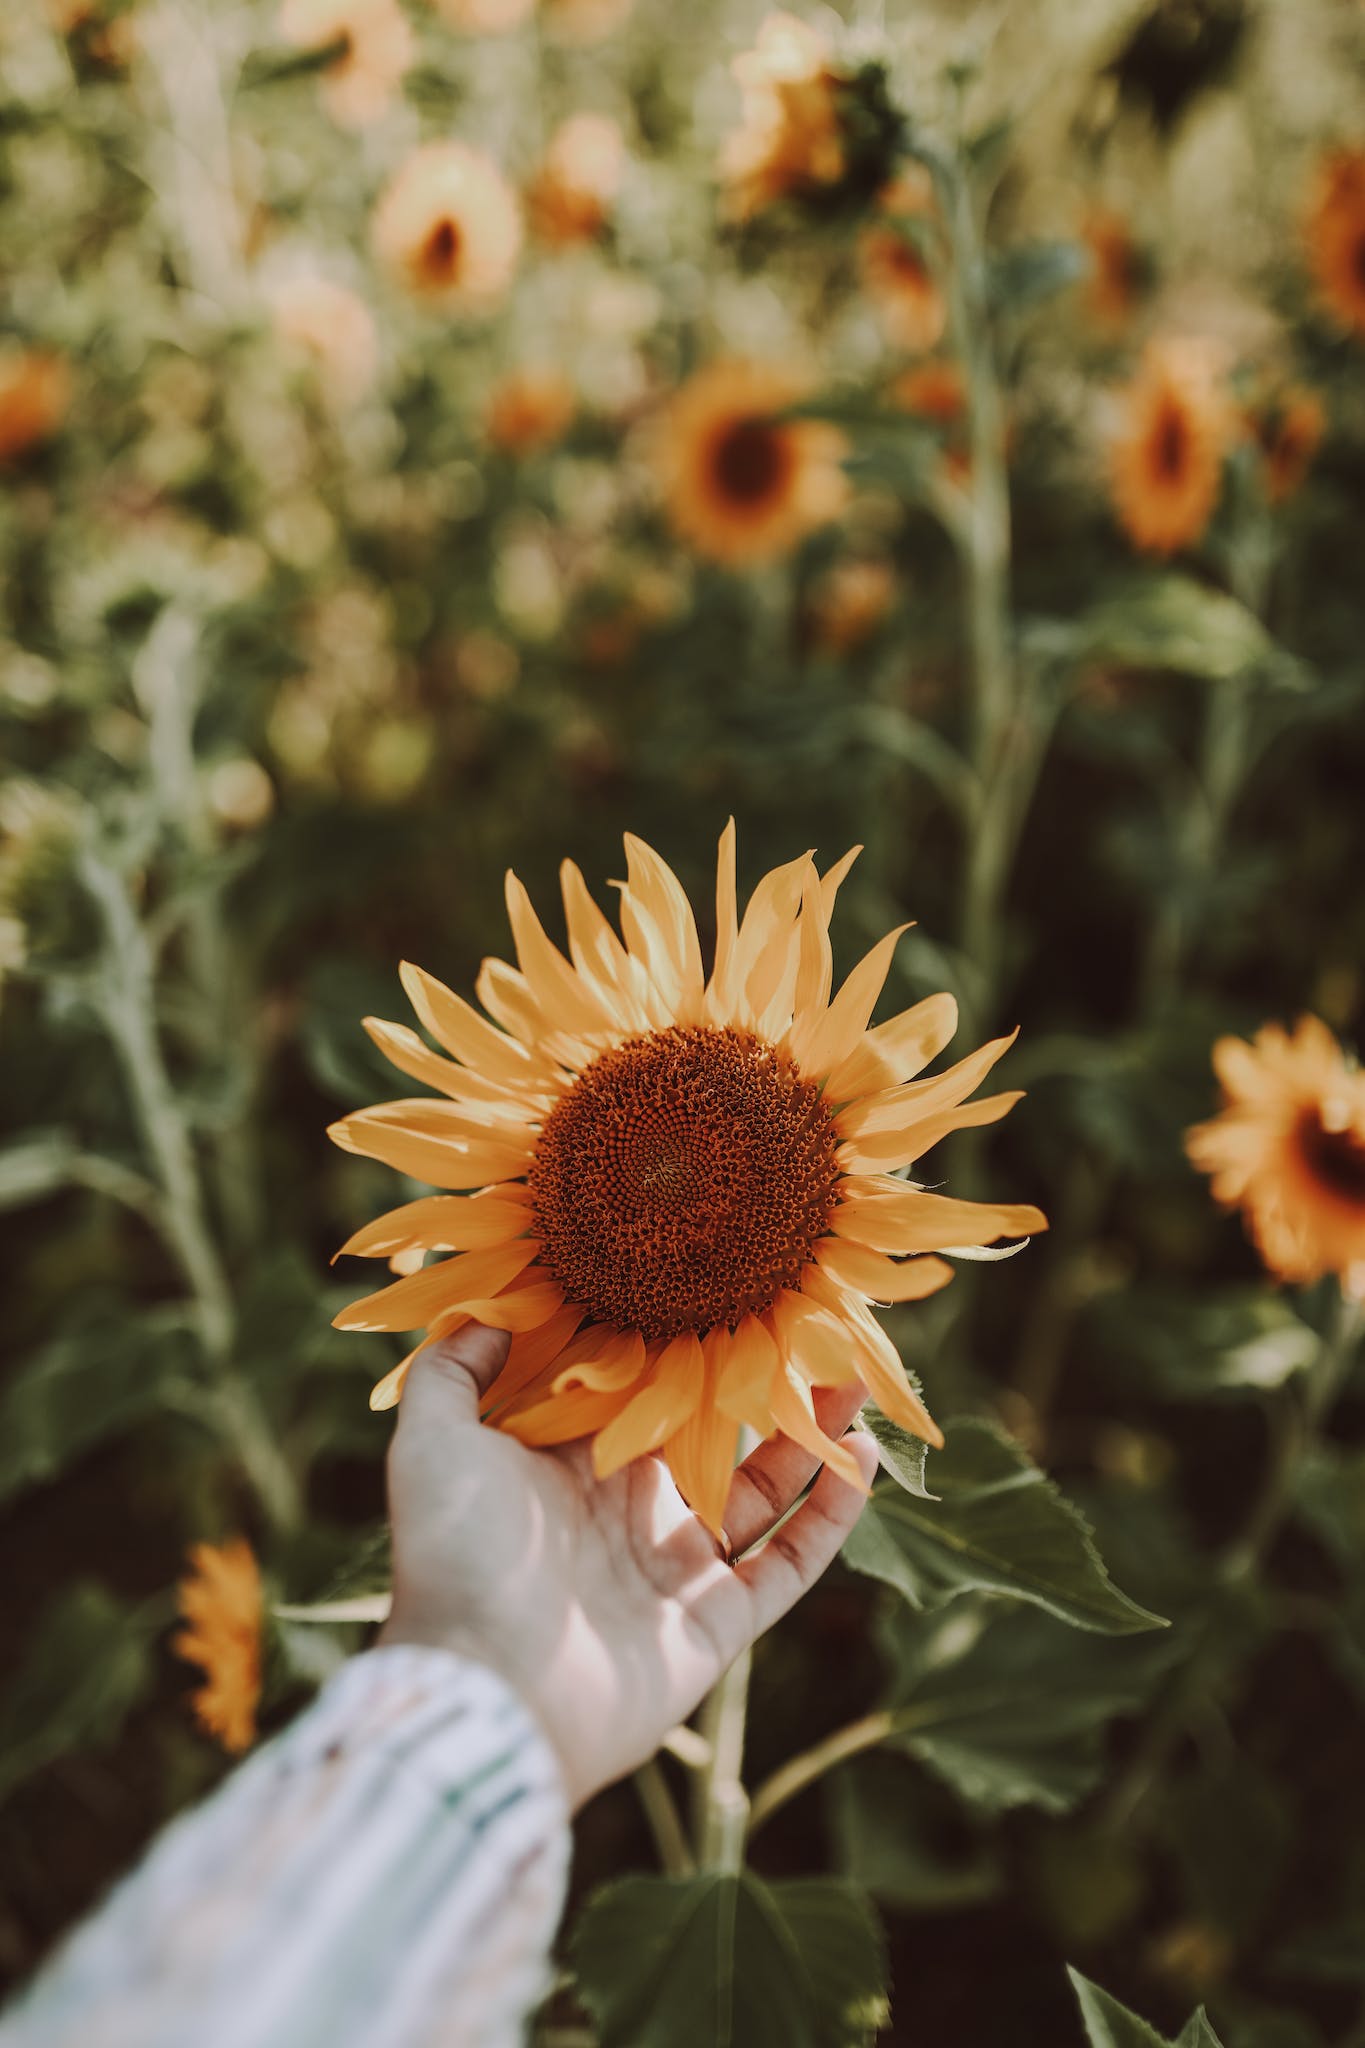 From above crop anonymous person tenderly touching blooming yellow sunflower growing on verdant countryside field